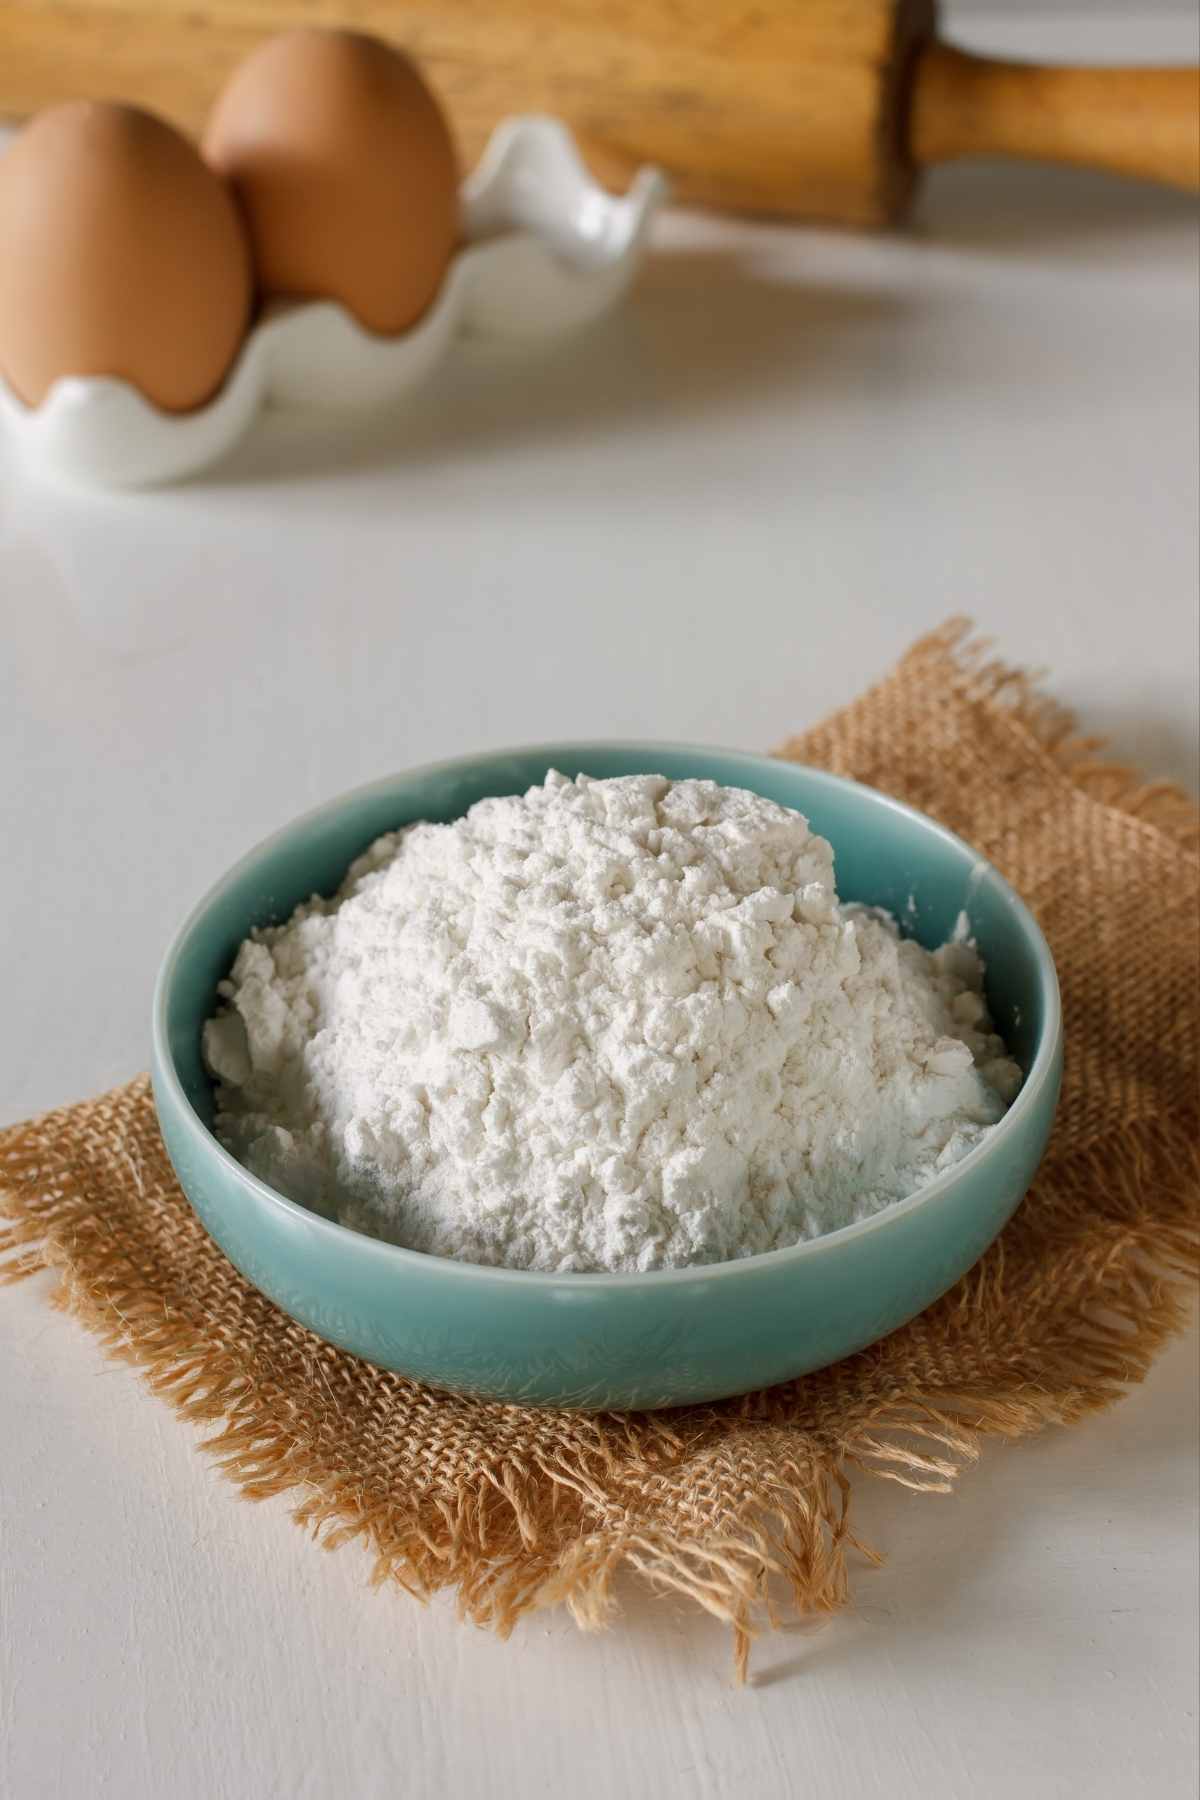 If a recipe calls for self-rising flour and you don’t have any, don’t worry as Here are three simple steps to make your own self-rising flour substitutes: all-Purpose Flour, baking Powder, and salt!